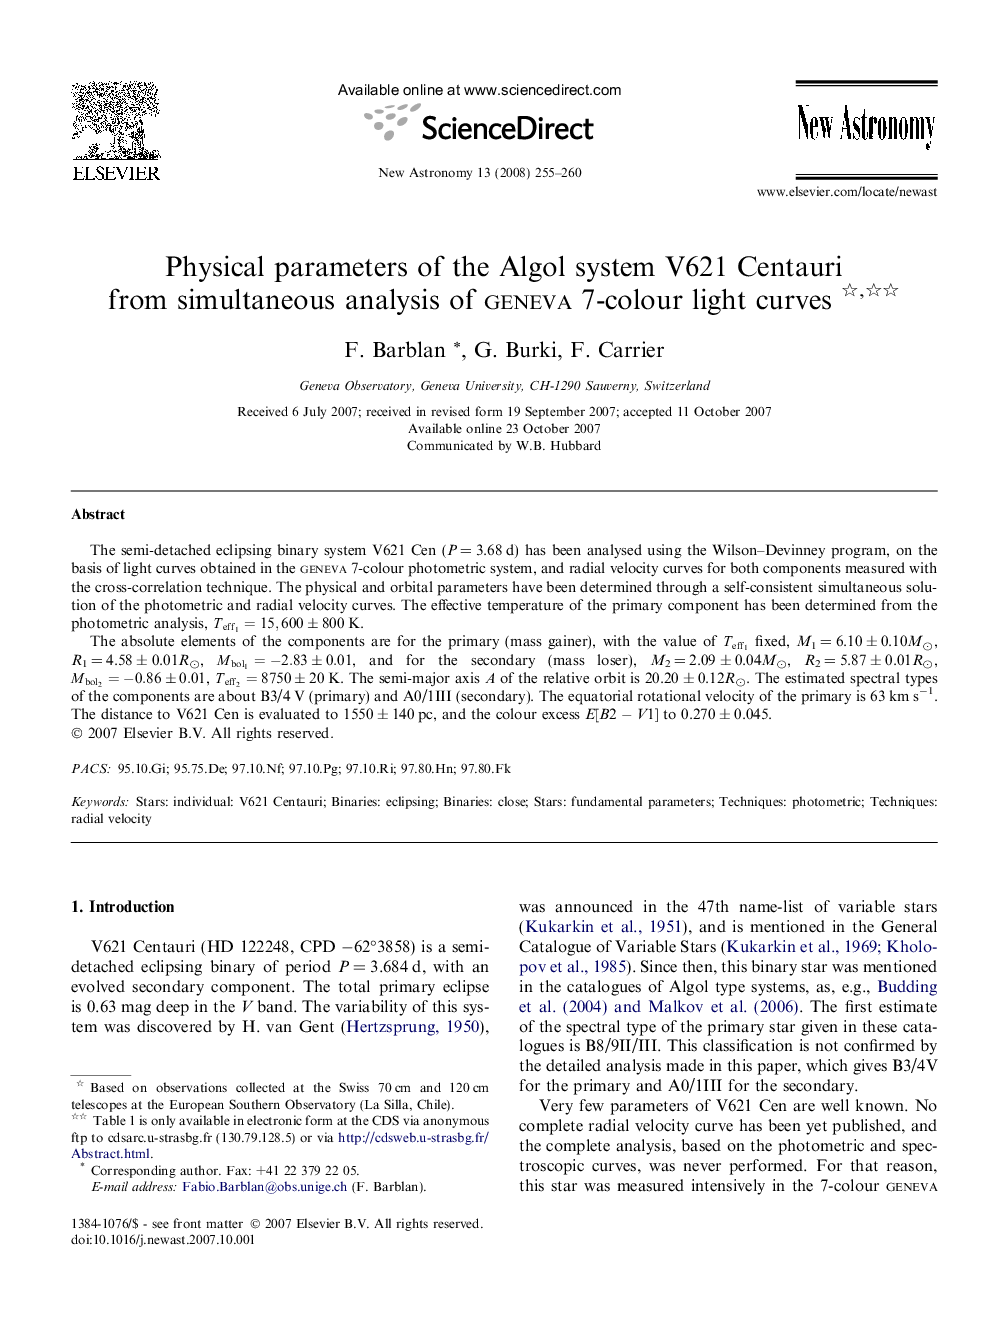 Physical parameters of the Algol system V621 Centauri from simultaneous analysis of Geneva 7-colour light curves